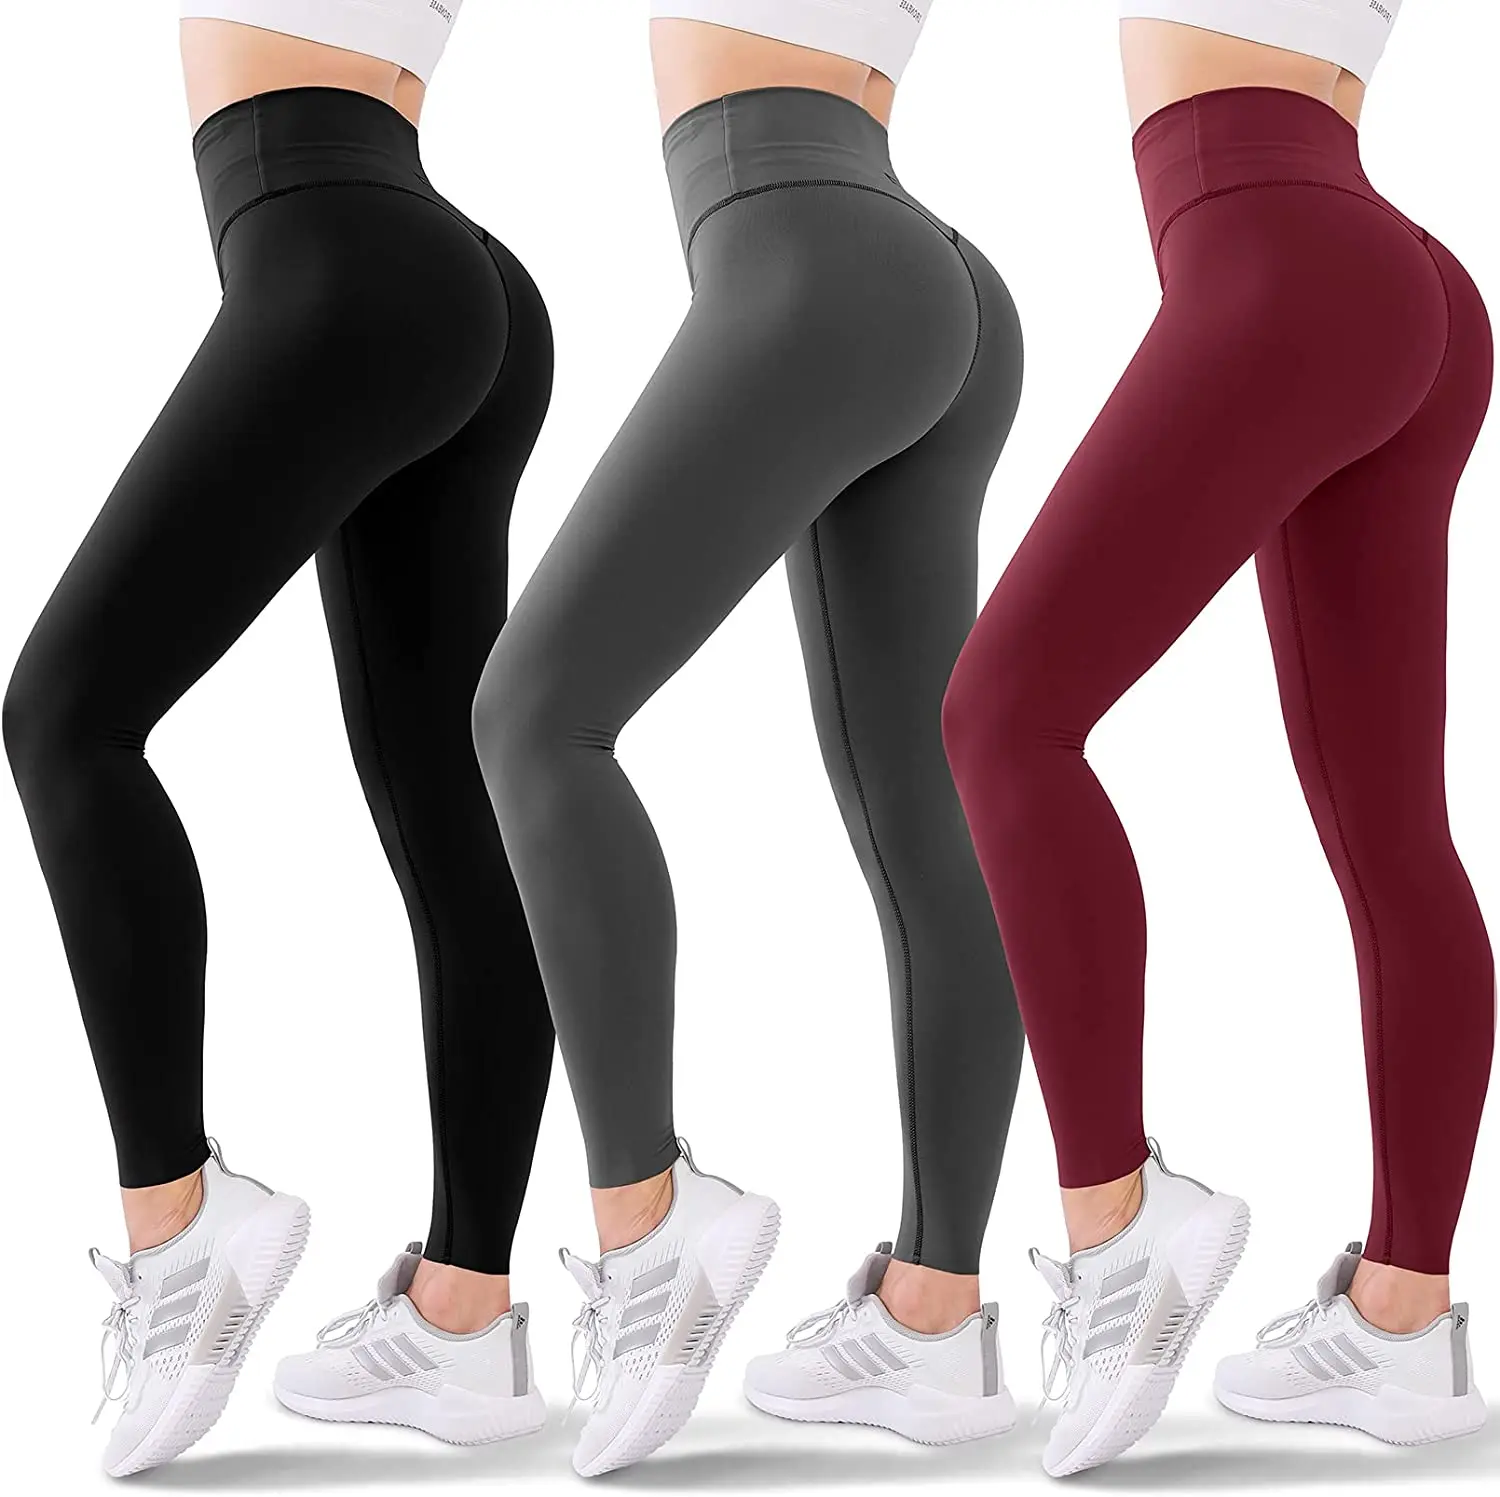 Tummy Control Workout Clothing Tight Leggings High Waist Butt Lifting Yoga  Pants With Pockets - Buy Gym Leggings For Women,Tummy Control Workout  Clothing,Yoga Pants With Pockets Product on Alibaba.com